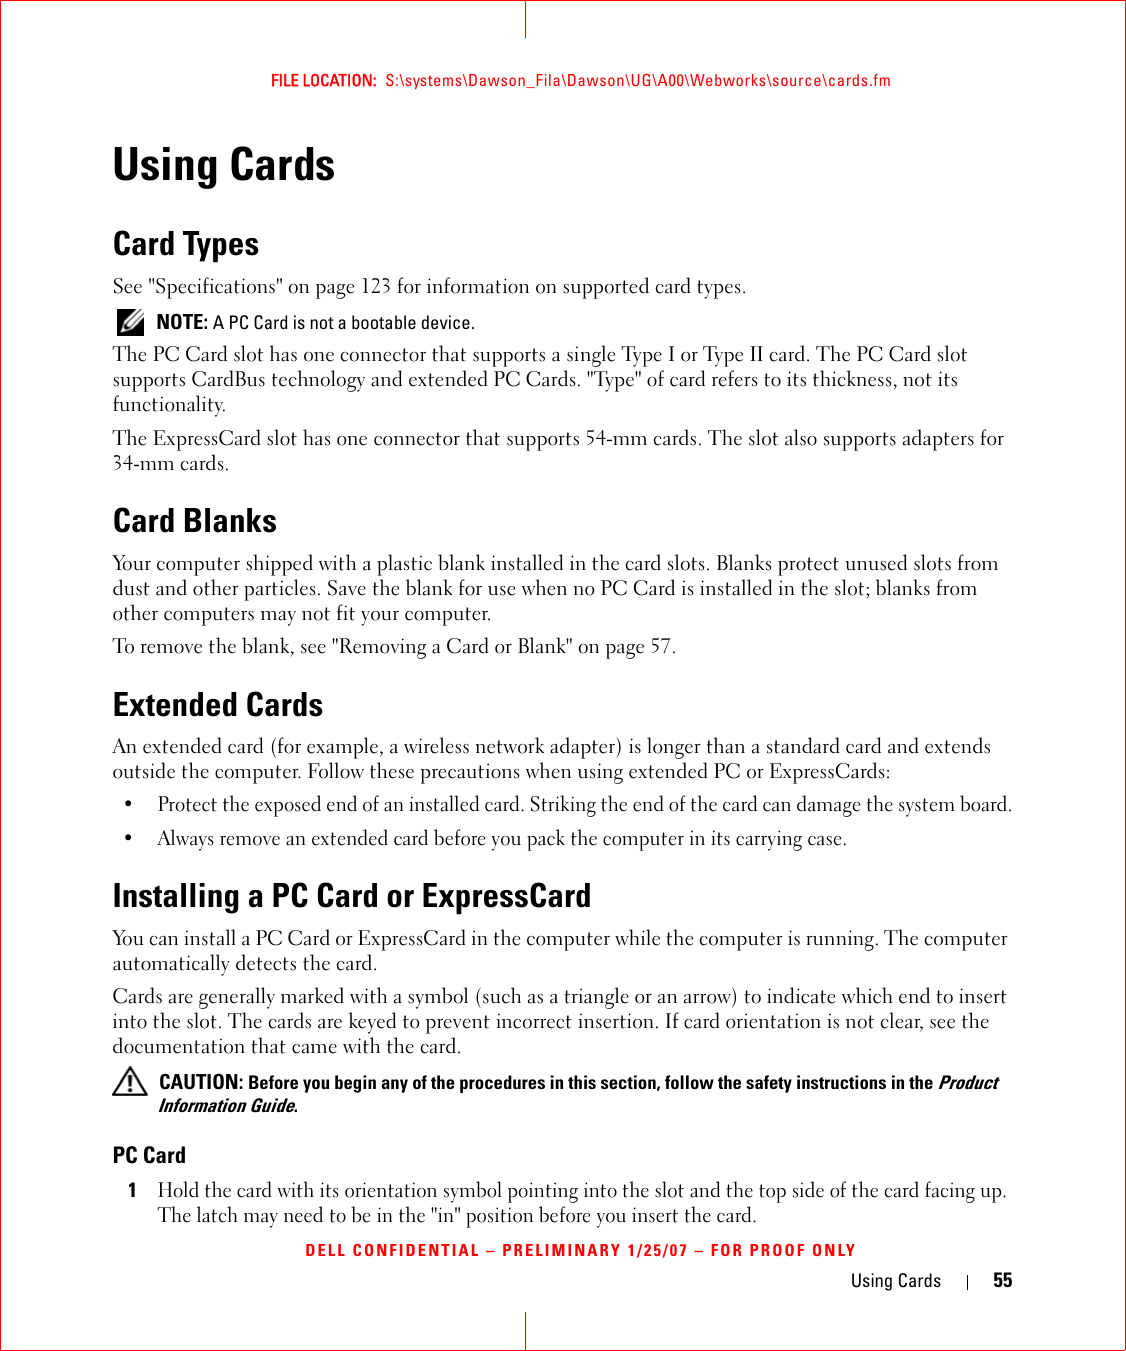 Using Cards 55FILE LOCATION:  S:\systems\Dawson_Fila\Dawson\UG\A00\Webworks\source\cards.fmDELL CONFIDENTIAL – PRELIMINARY 1/25/07 – FOR PROOF ONLYUsing CardsCard TypesSee &quot;Specifications&quot; on page 123 for information on supported card types. NOTE: A PC Card is not a bootable device.The PC Card slot has one connector that supports a single Type I or Type II card. The PC Card slot supports CardBus technology and extended PC Cards. &quot;Type&quot; of card refers to its thickness, not its functionality.The ExpressCard slot has one connector that supports 54-mm cards. The slot also supports adapters for 34-mm cards.Card BlanksYour computer shipped with a plastic blank installed in the card slots. Blanks protect unused slots from dust and other particles. Save the blank for use when no PC Card is installed in the slot; blanks from other computers may not fit your computer.To remove the blank, see &quot;Removing a Card or Blank&quot; on page 57.Extended CardsAn extended card (for example, a wireless network adapter) is longer than a standard card and extends outside the computer. Follow these precautions when using extended PC or ExpressCards:• Protect the exposed end of an installed card. Striking the end of the card can damage the system board.• Always remove an extended card before you pack the computer in its carrying case.Installing a PC Card or ExpressCardYou can install a PC Card or ExpressCard in the computer while the computer is running. The computer automatically detects the card.Cards are generally marked with a symbol (such as a triangle or an arrow) to indicate which end to insert into the slot. The cards are keyed to prevent incorrect insertion. If card orientation is not clear, see the documentation that came with the card.  CAUTION: Before you begin any of the procedures in this section, follow the safety instructions in the Product Information Guide.PC Card1Hold the card with its orientation symbol pointing into the slot and the top side of the card facing up. The latch may need to be in the &quot;in&quot; position before you insert the card.